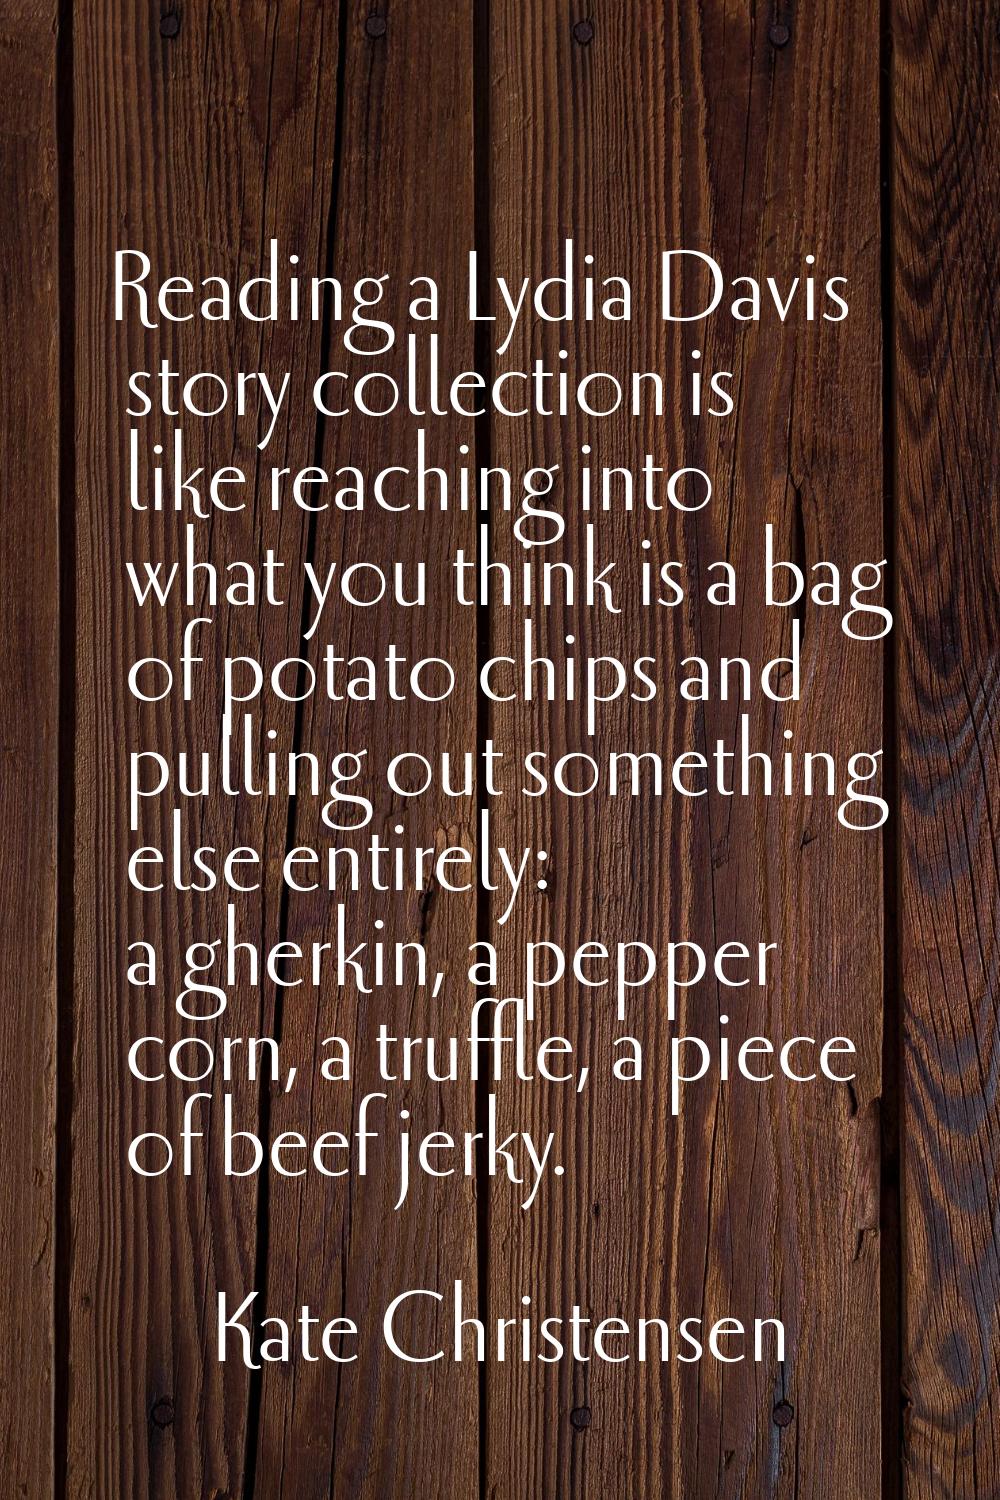 Reading a Lydia Davis story collection is like reaching into what you think is a bag of potato chip